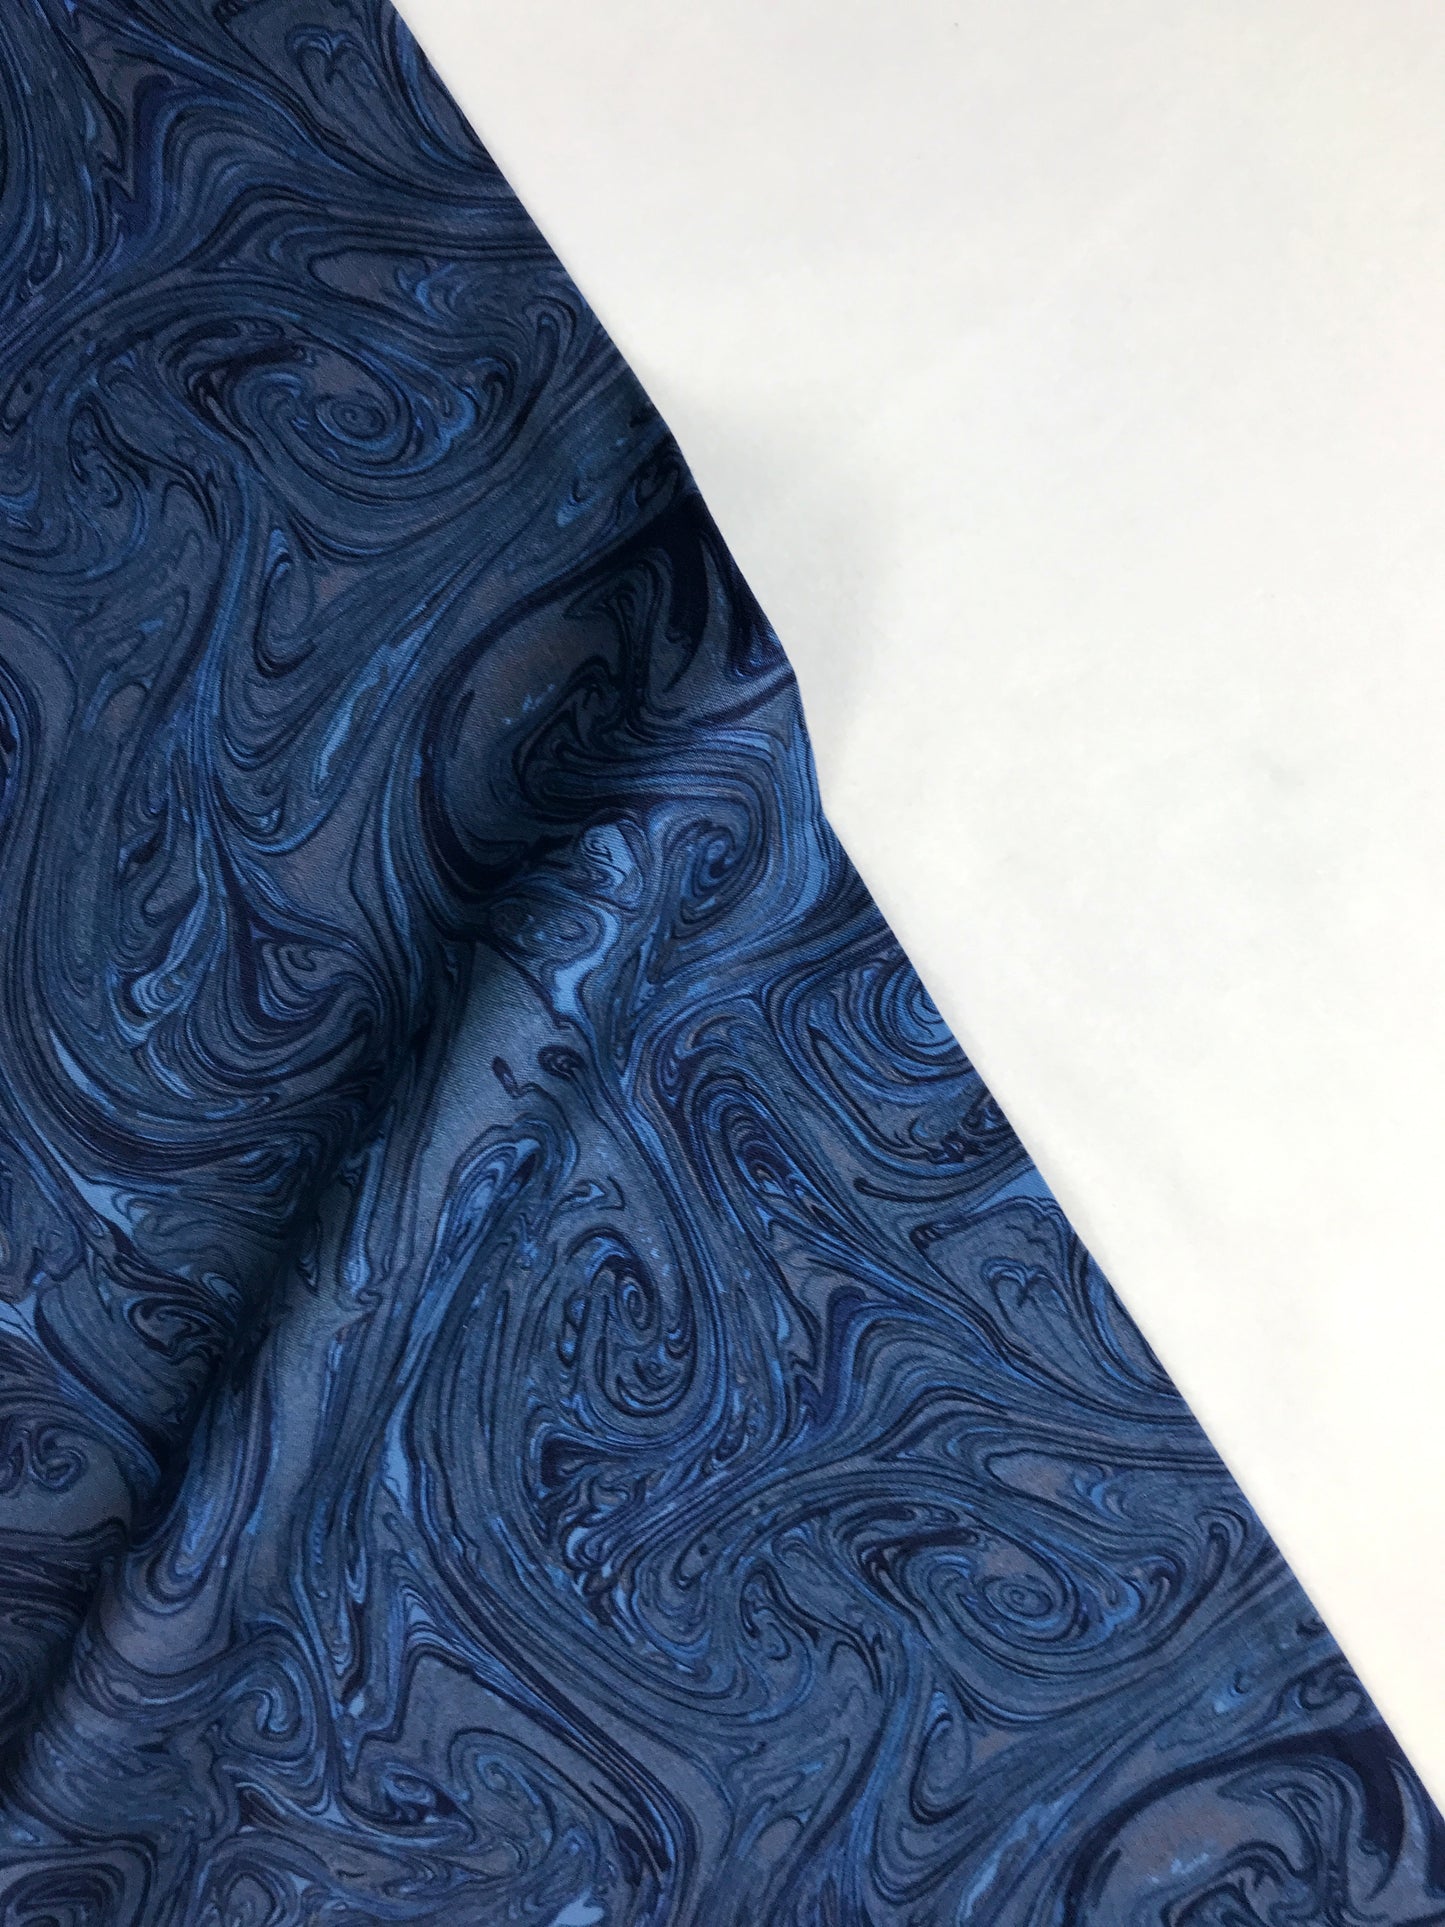 michael miller fabric marbled marble nite Fabric Fetish